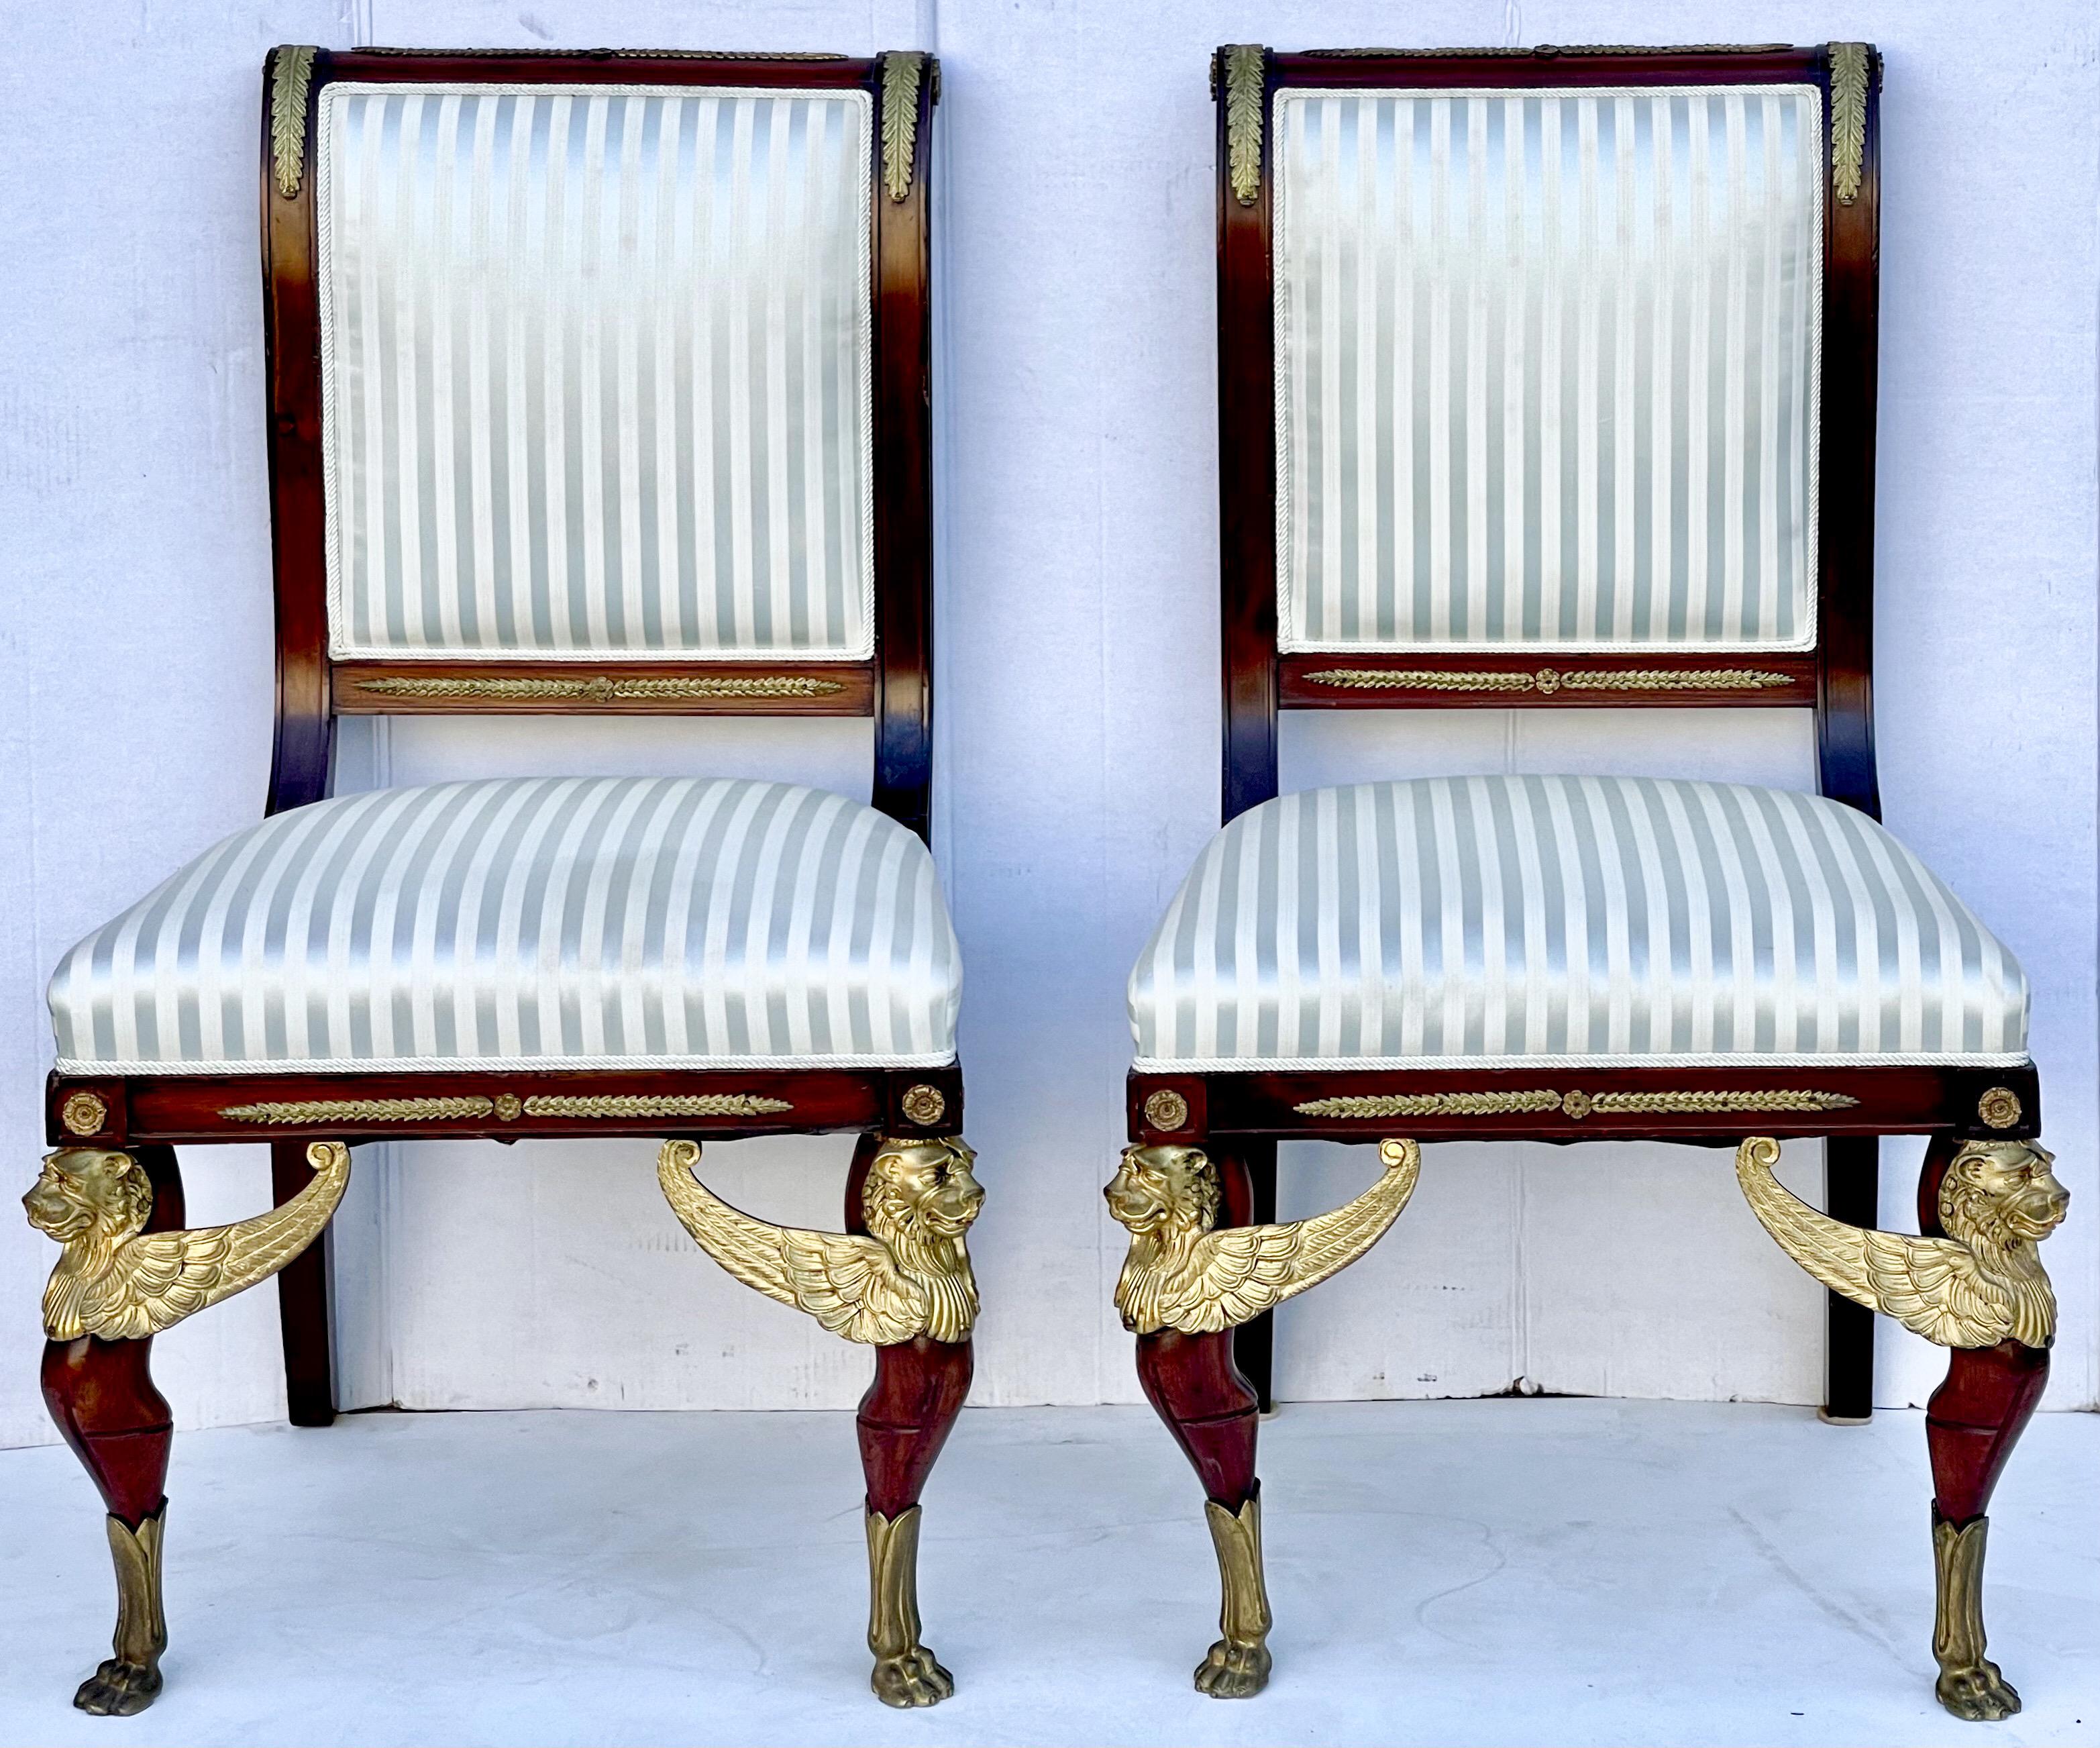 This is a pair of late 19th century French Empire mahogany side chairs with gilt bronze mounts. Note the griffins on the legs! The fabric appears to be silk. It is vintage and in very good condition.